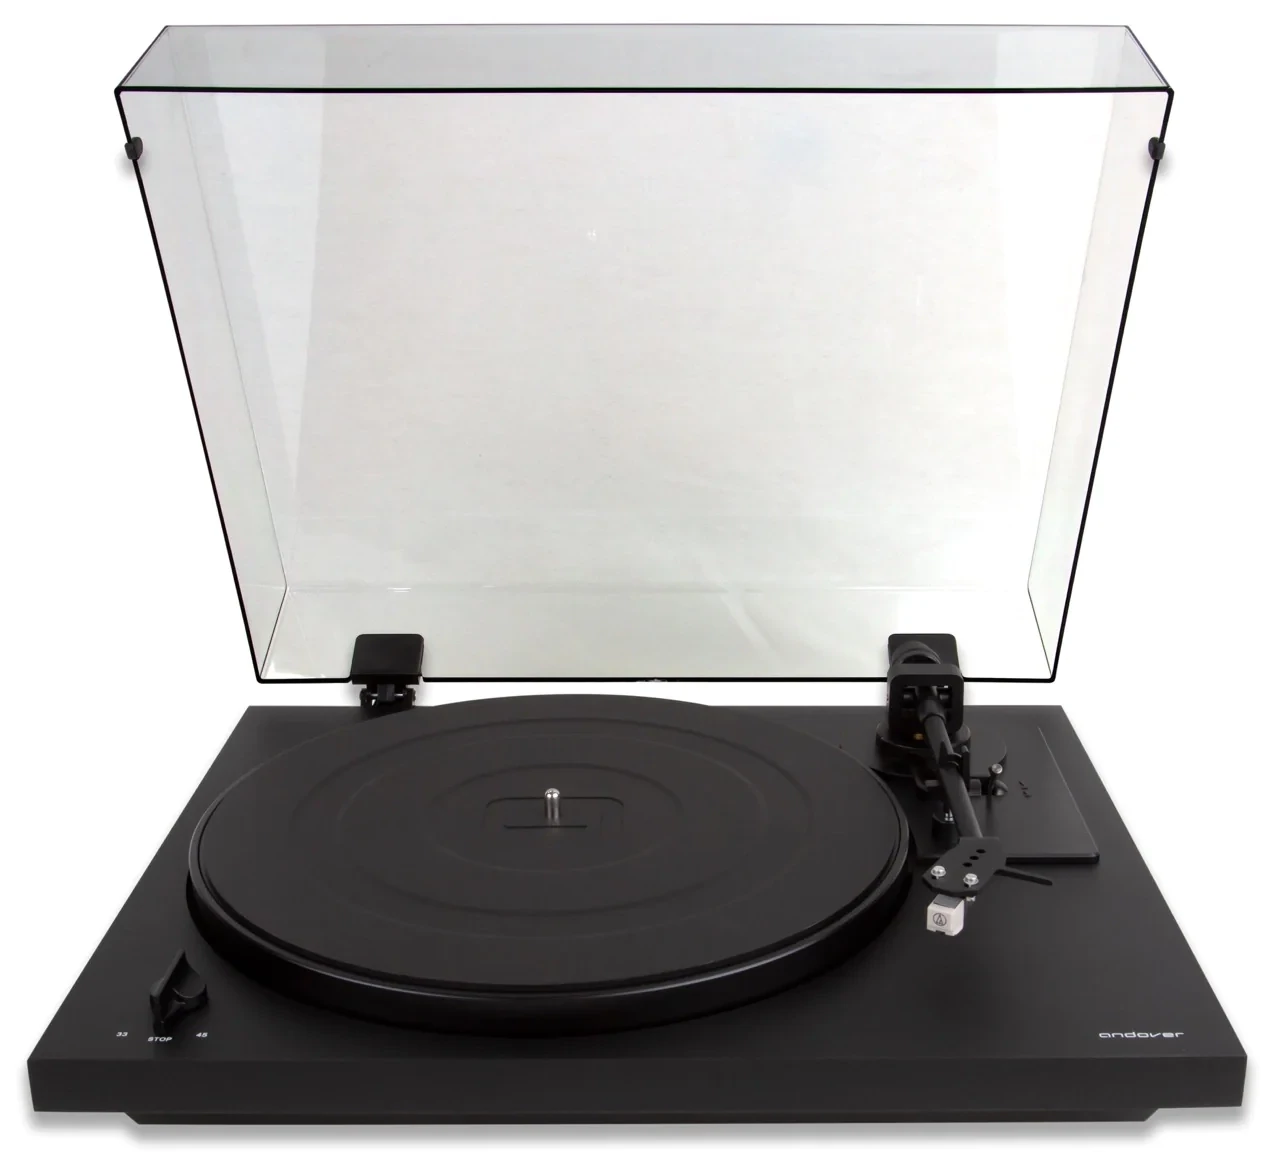 Andover Spindeck 2 Semi-Automatic Turntable